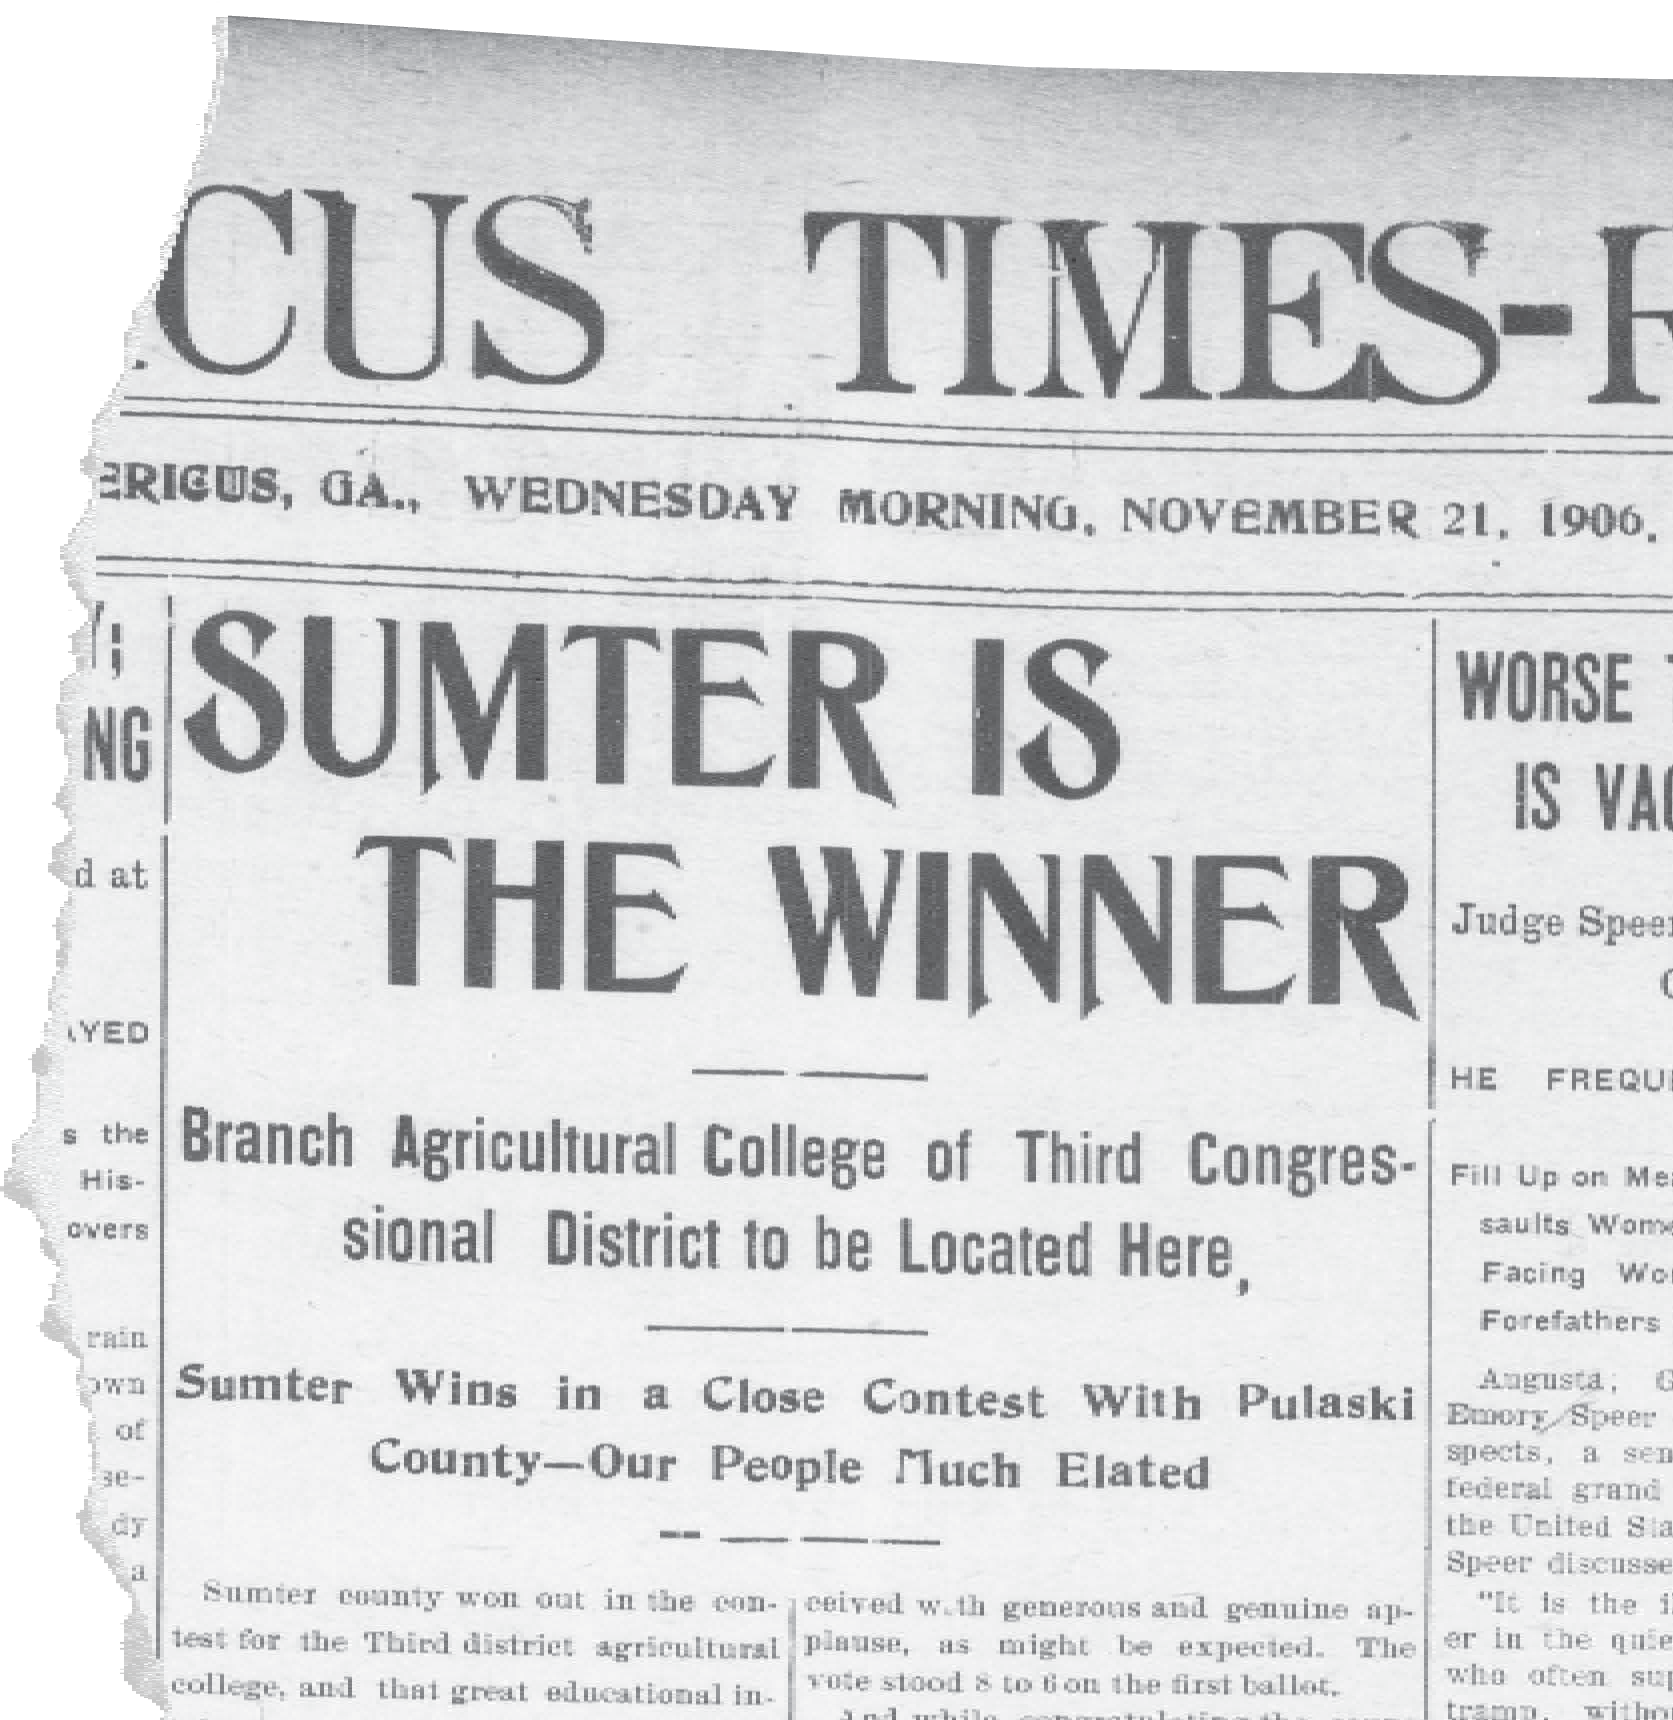 newspaper announces that "Sumter is the Winner" of new college site